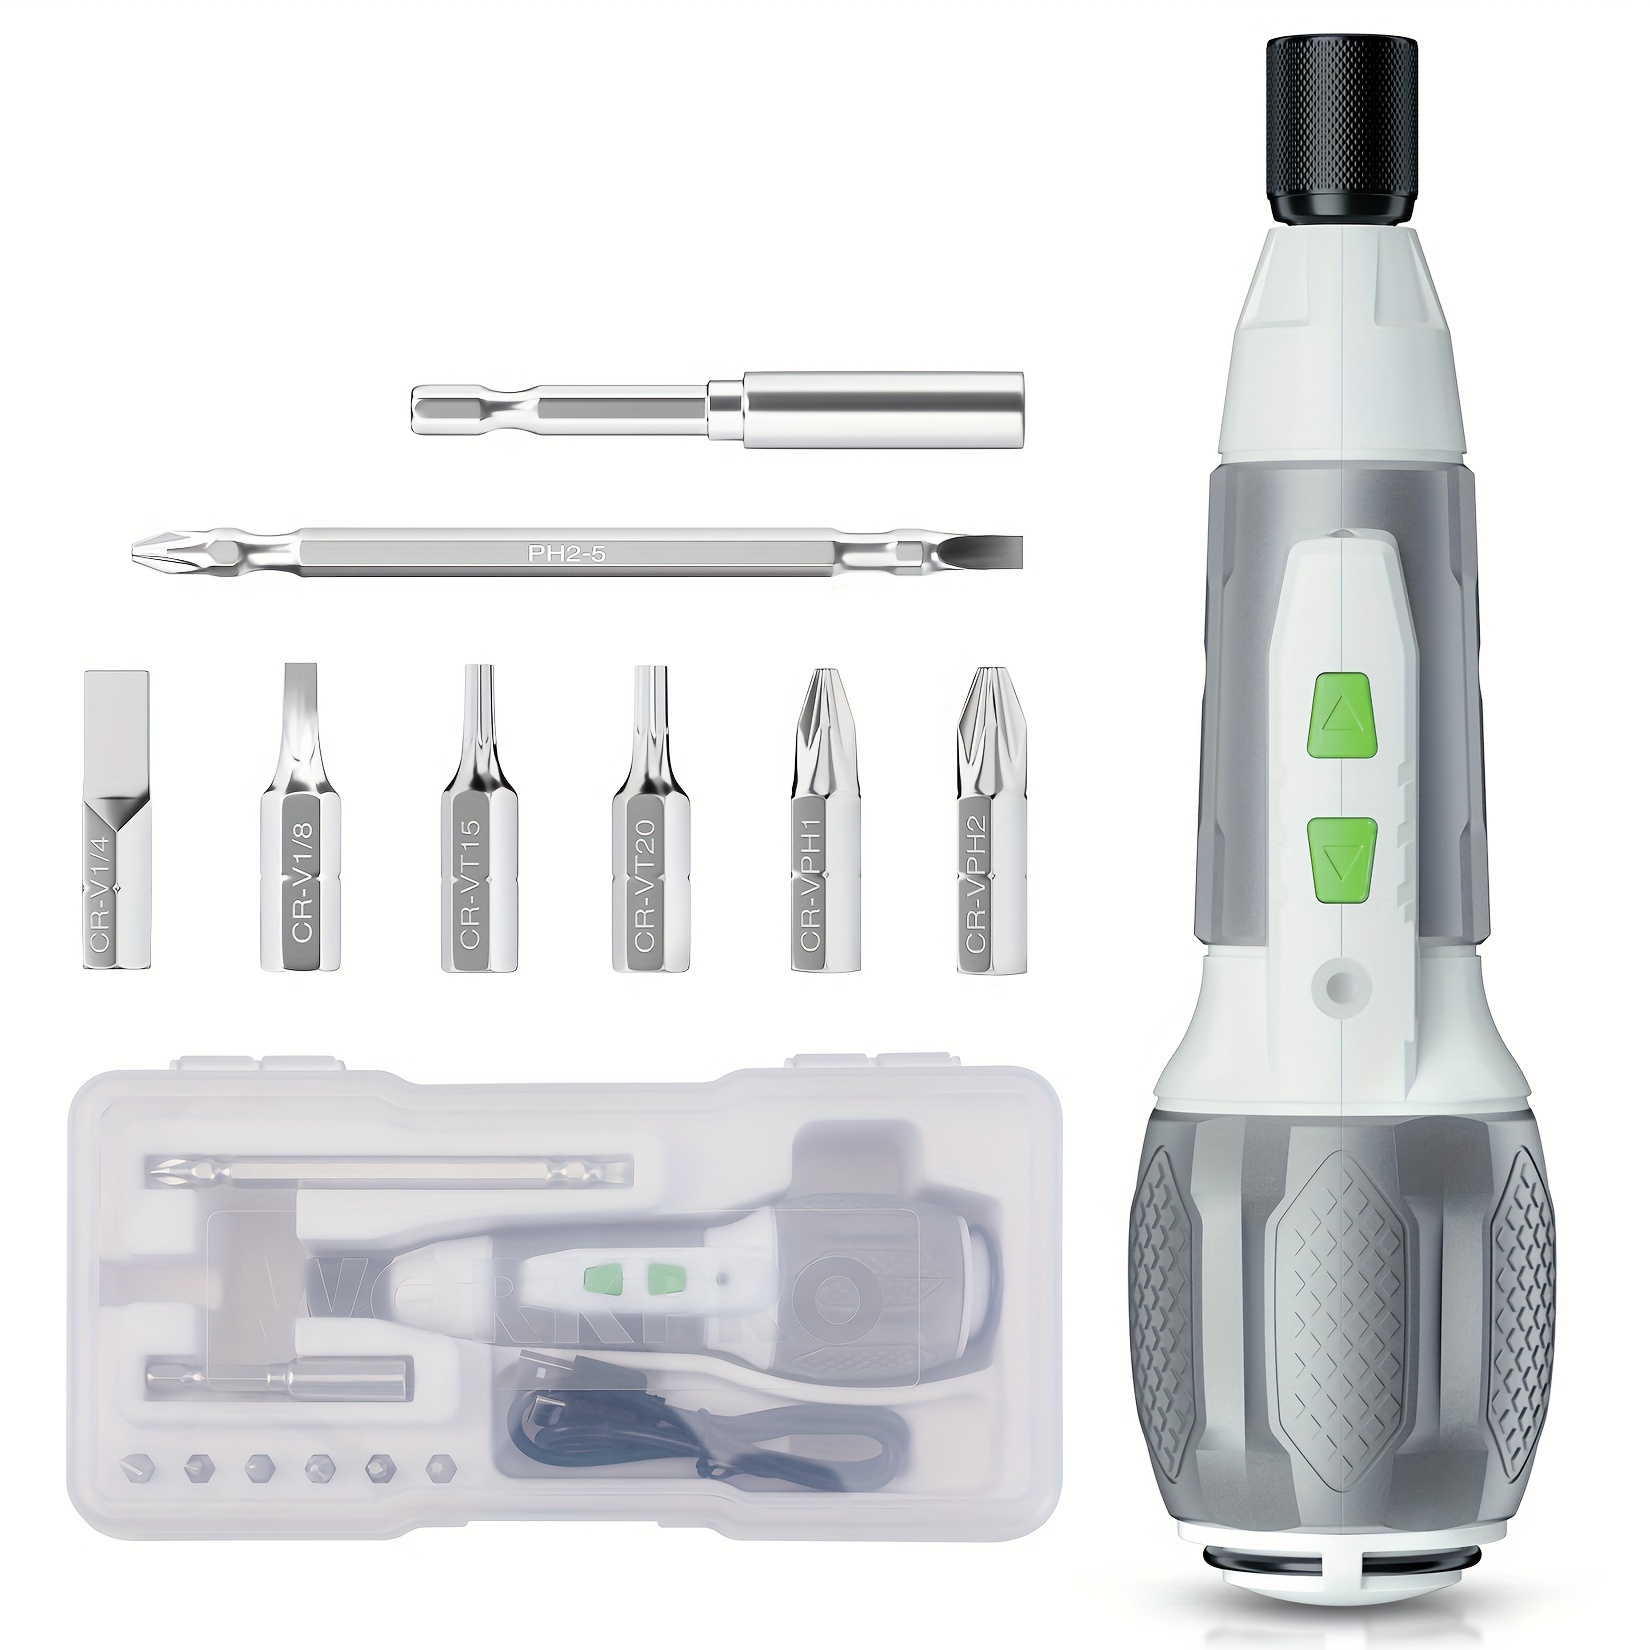 

Workpro Electric Cordless Screwdriver Set - 4v Usb Rechargeable Lithium-ion Battery Screwdriver Kit With Led Light - Small Screwdriver With 7pcs Bits For Home, Office, Apartment - White